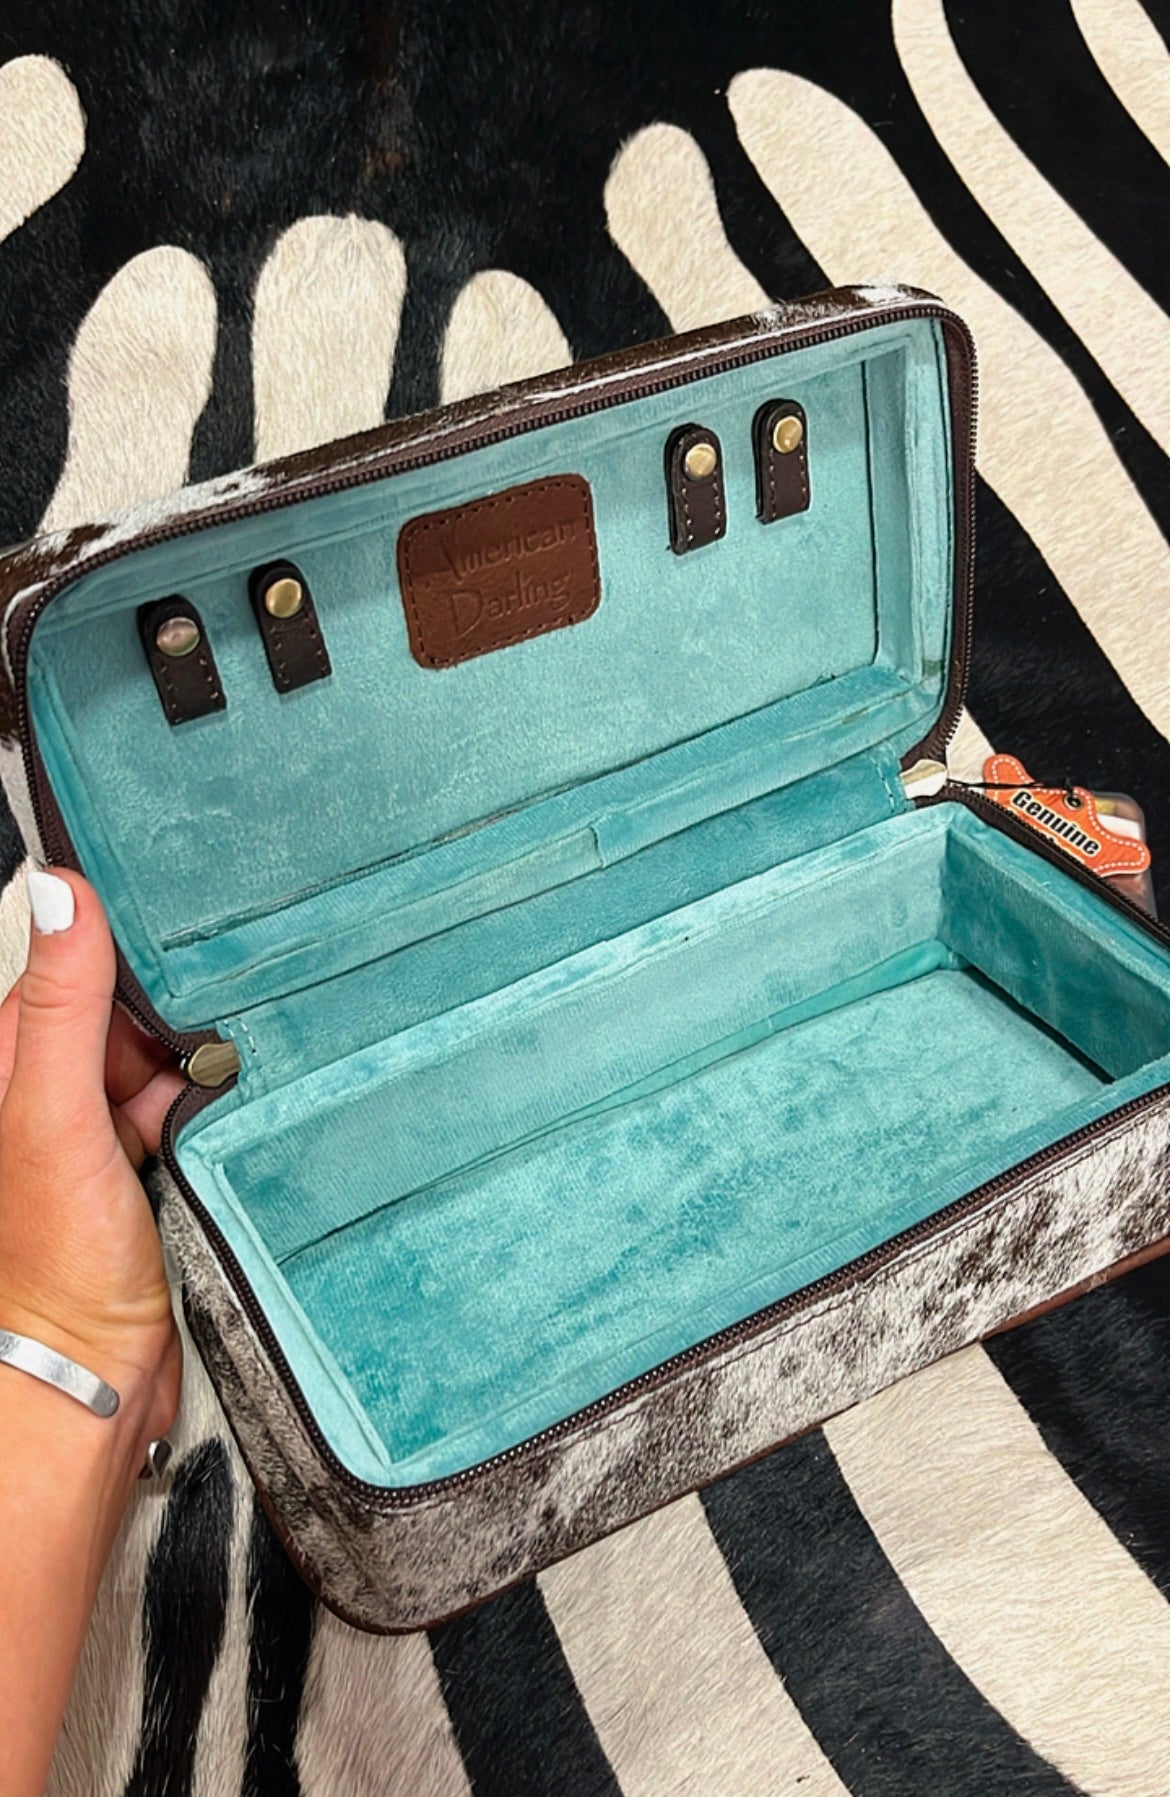 The On The Road Again Makeup Case